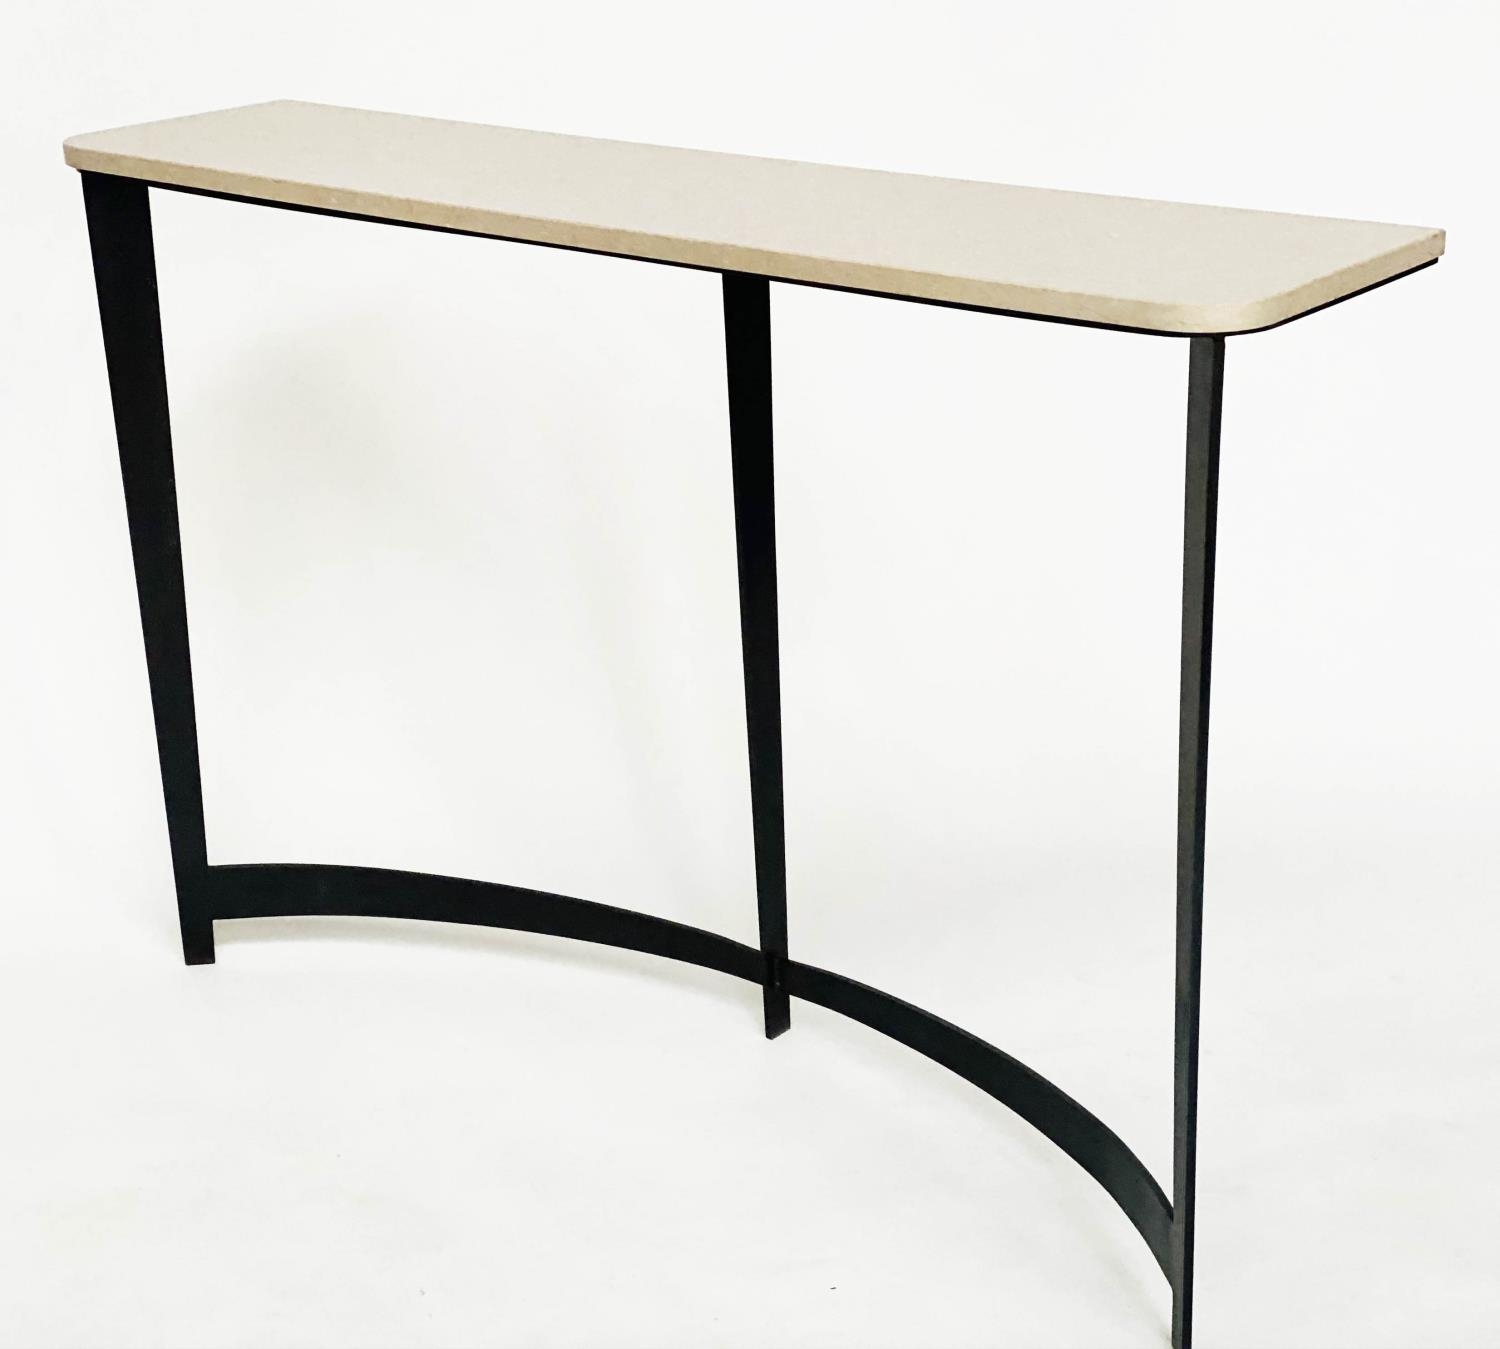 TOM FAULKNER CONSOLE TABLE, rounded rectangular travertine marble and wrought iron support, 127cm - Image 6 of 6